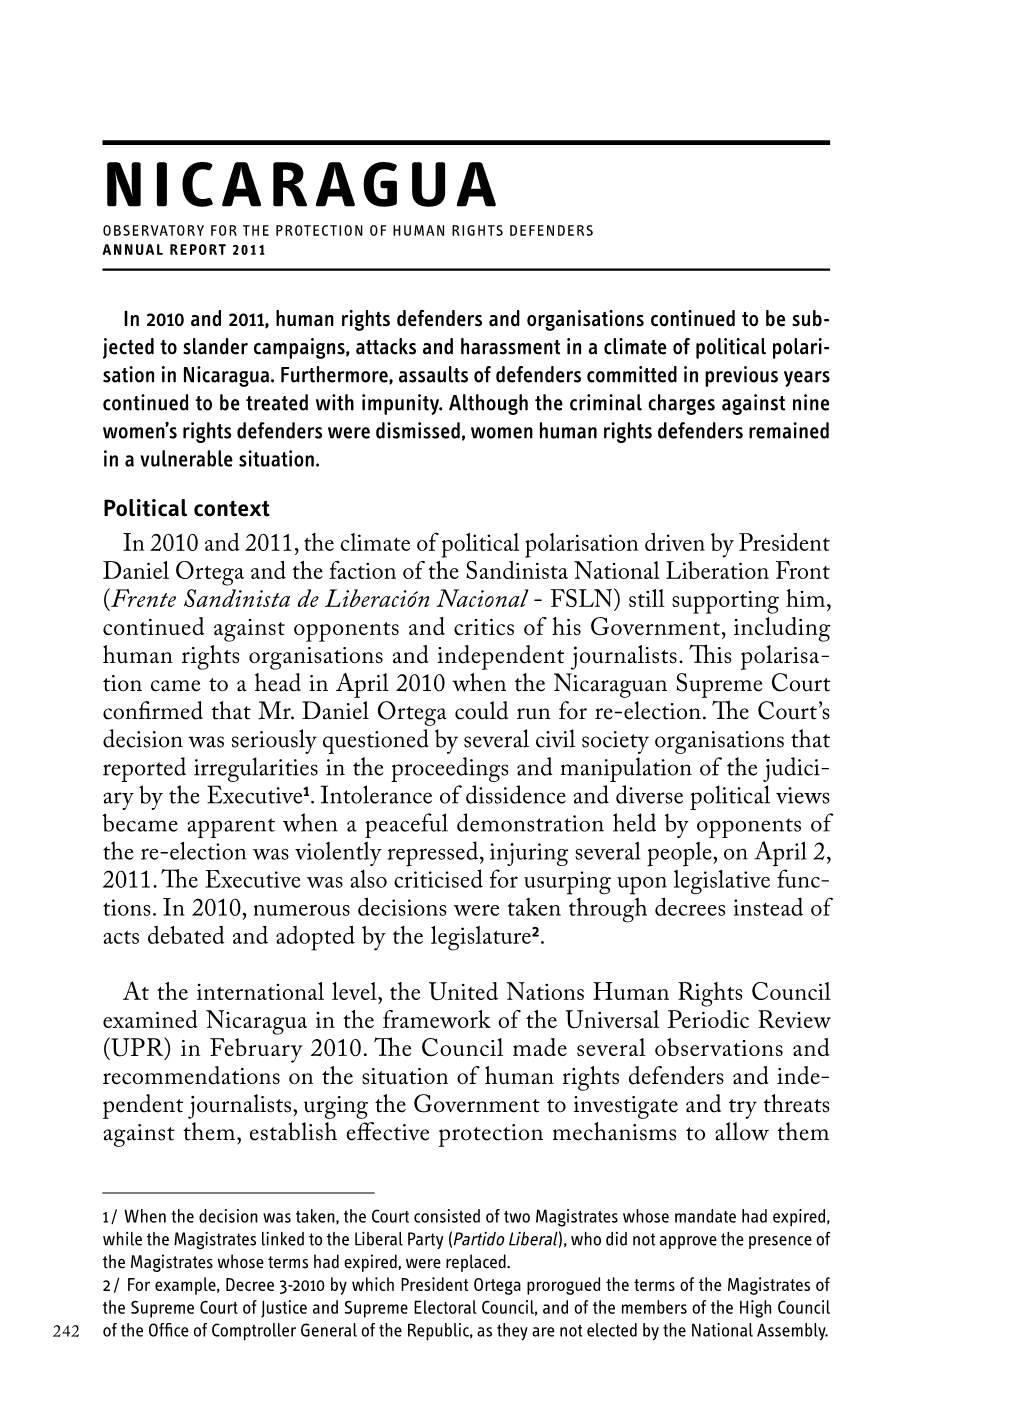 NICARAGUA Observatory for the Protection of Human Rights Defenders Annual Report 2011